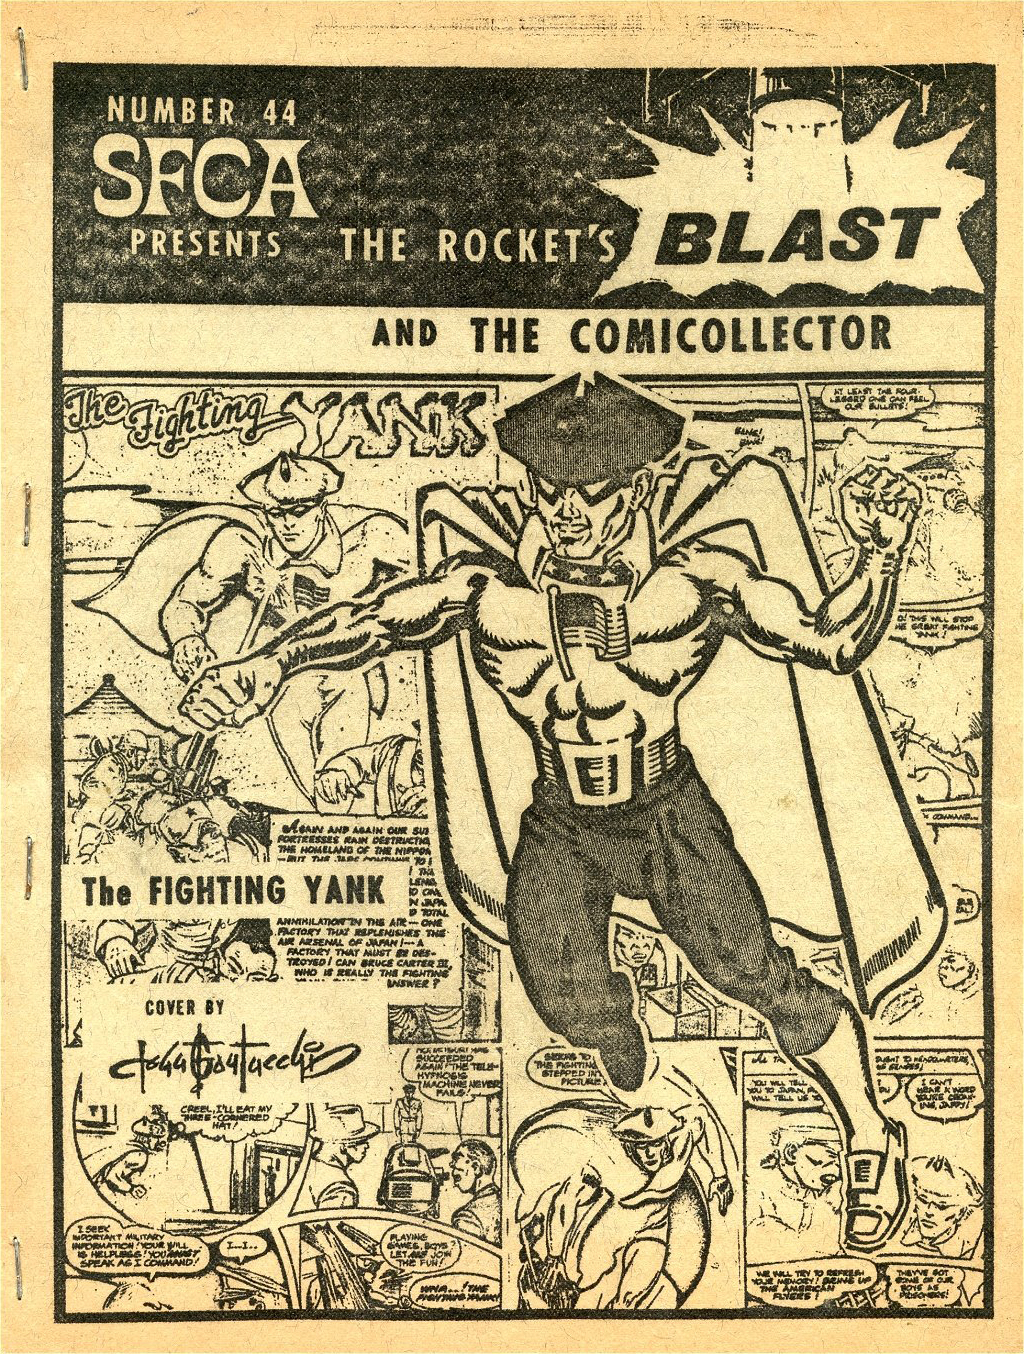 Rocket's Blast & The Comicollector 44: Fighting Yank cover by John G. Fantucchio